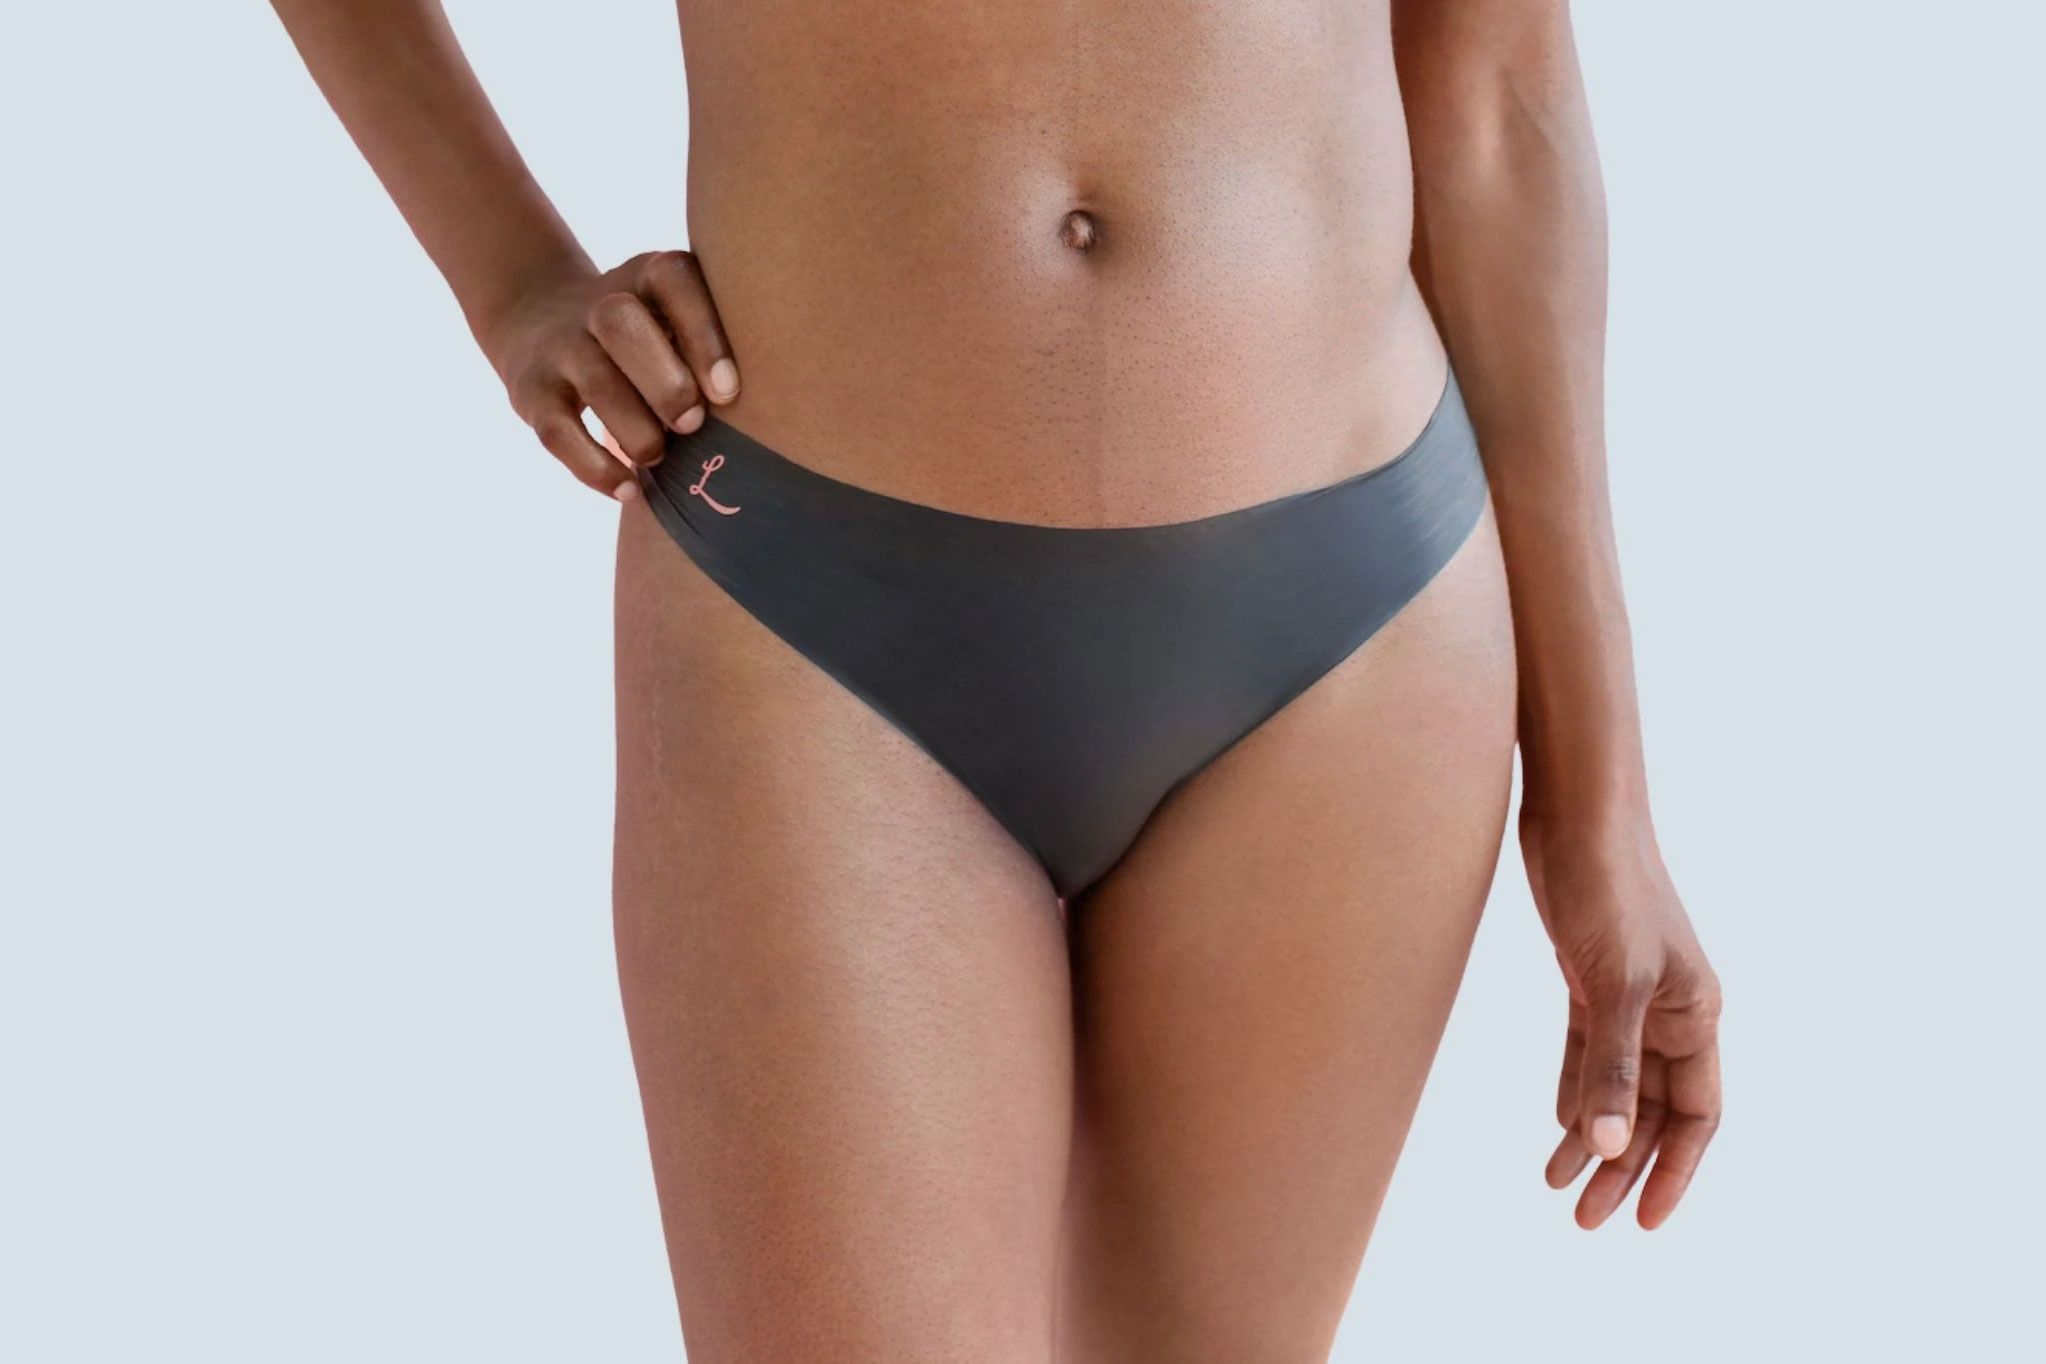 This Underwear Is FDA-Cleared for Oral pic